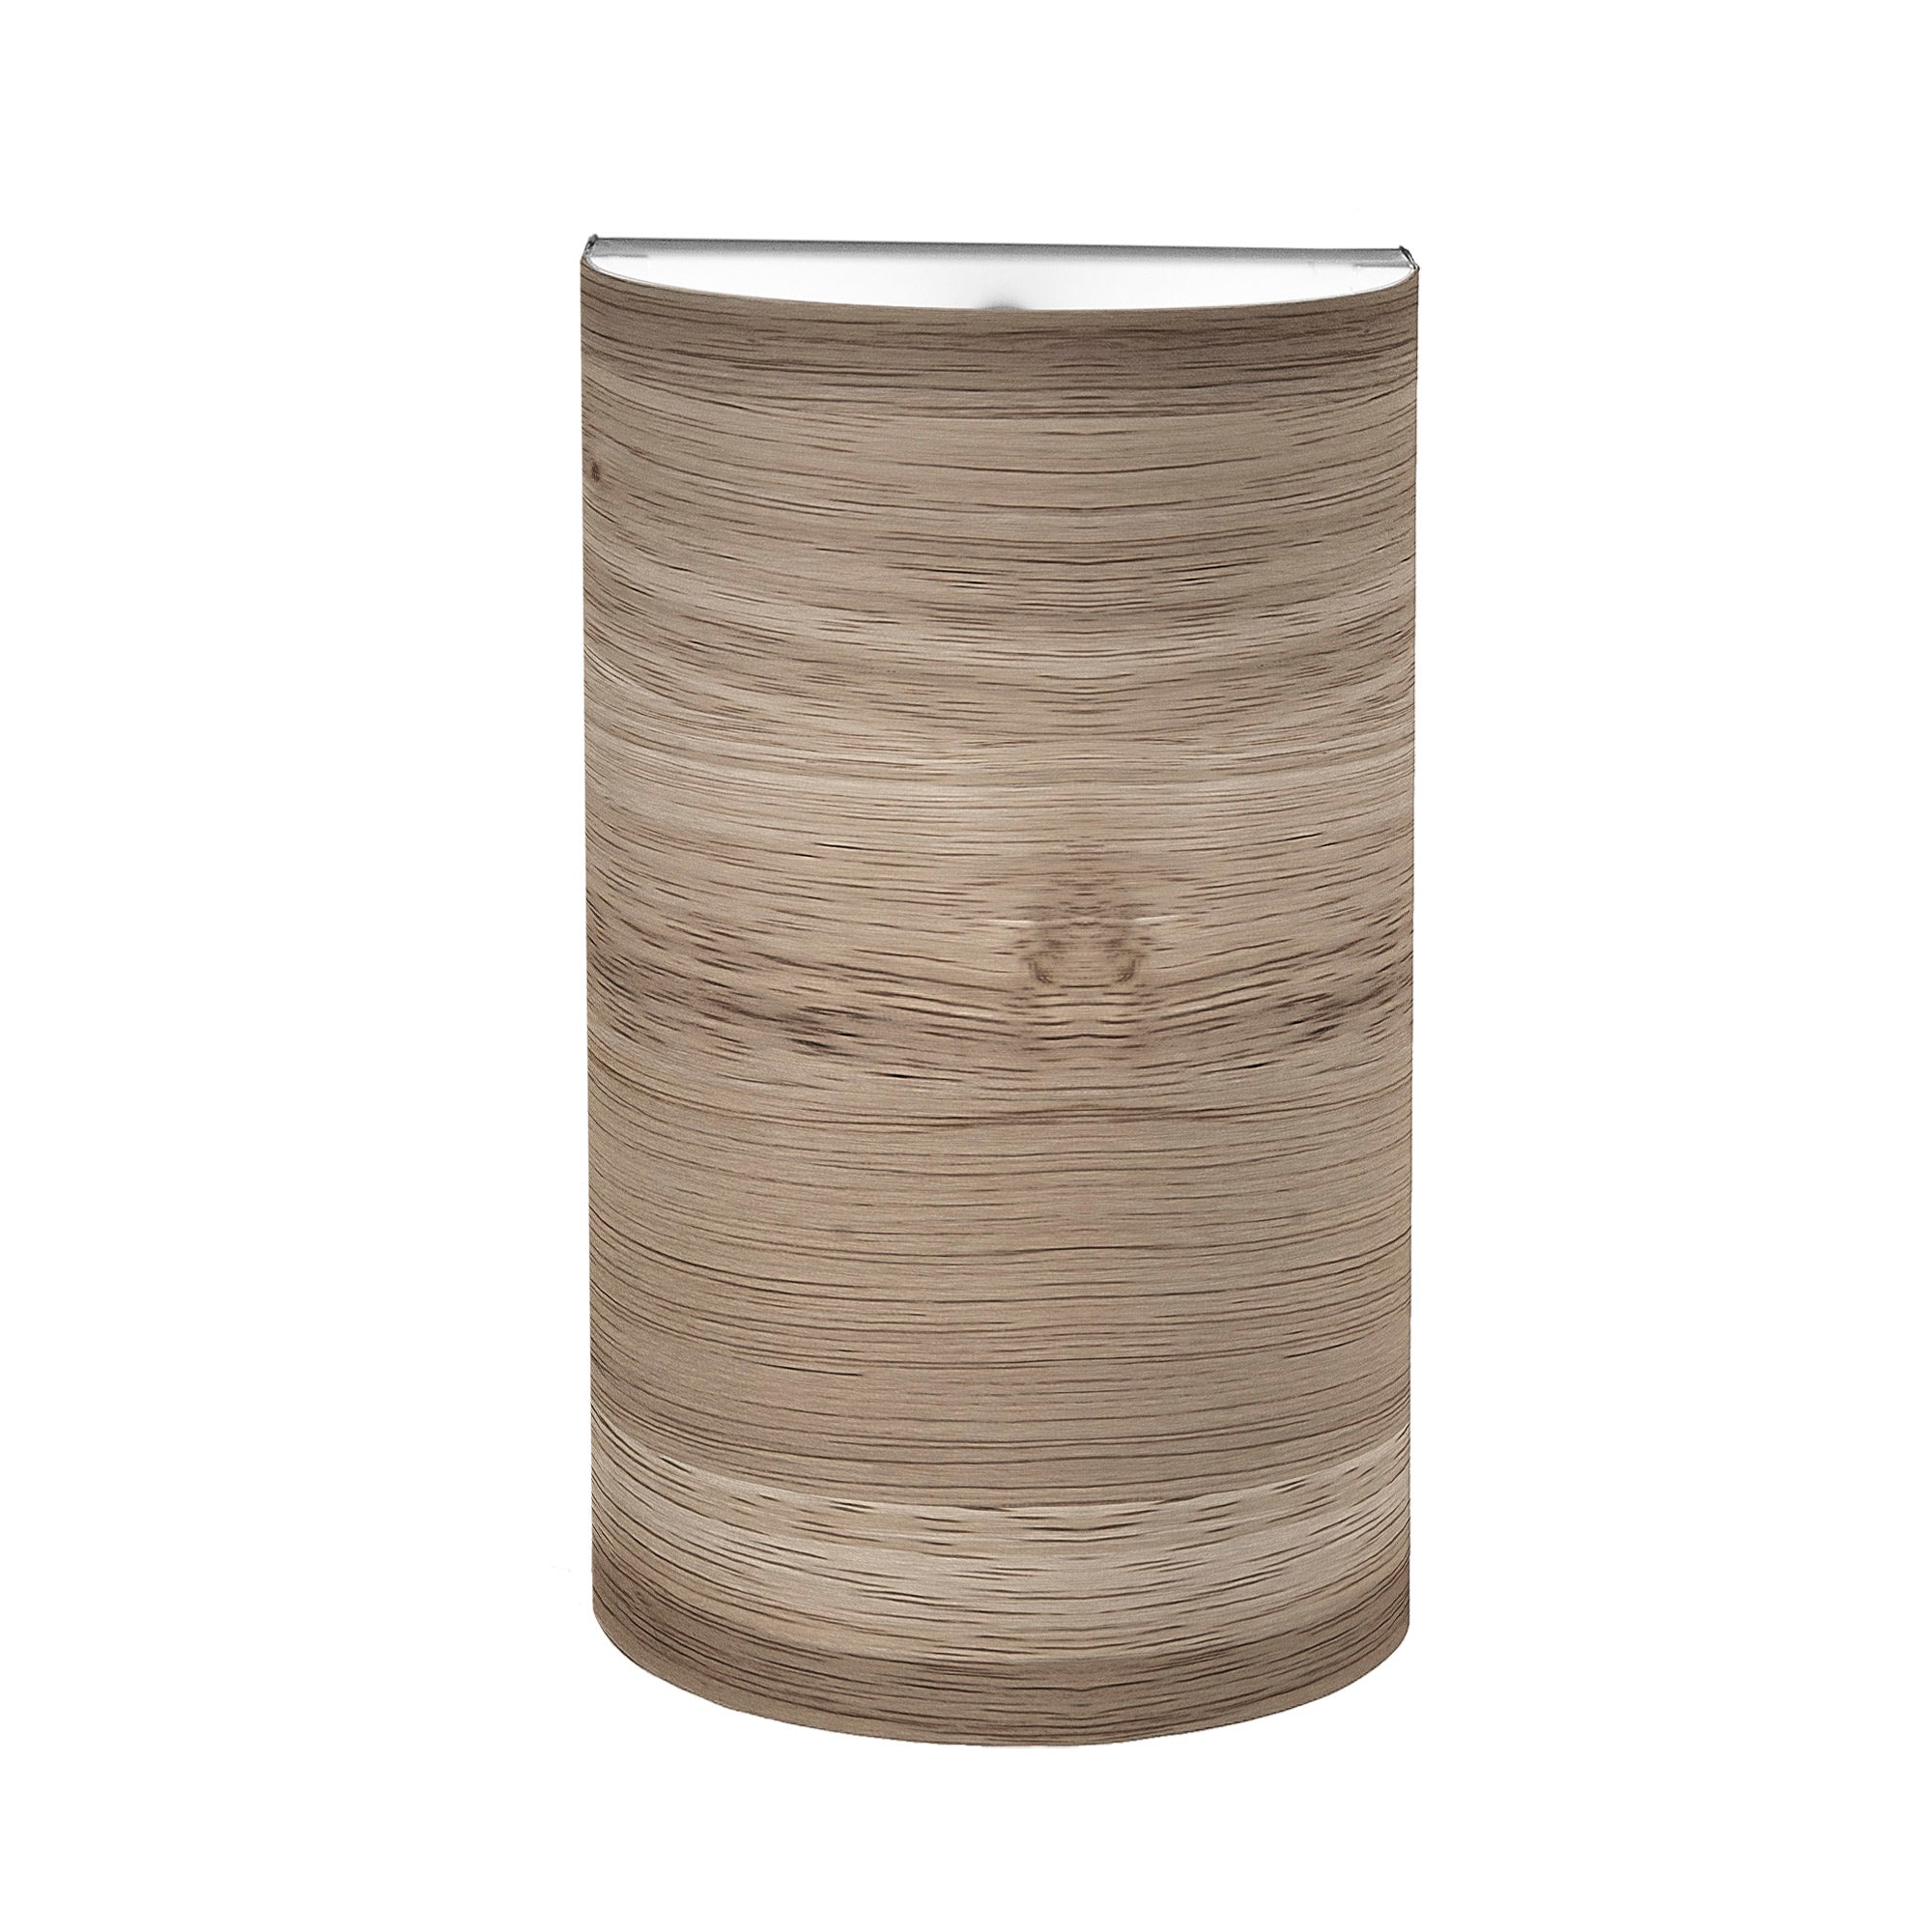 The Myra Wall Sconce from Seascape Fixtures in photo veneer, natural  color.